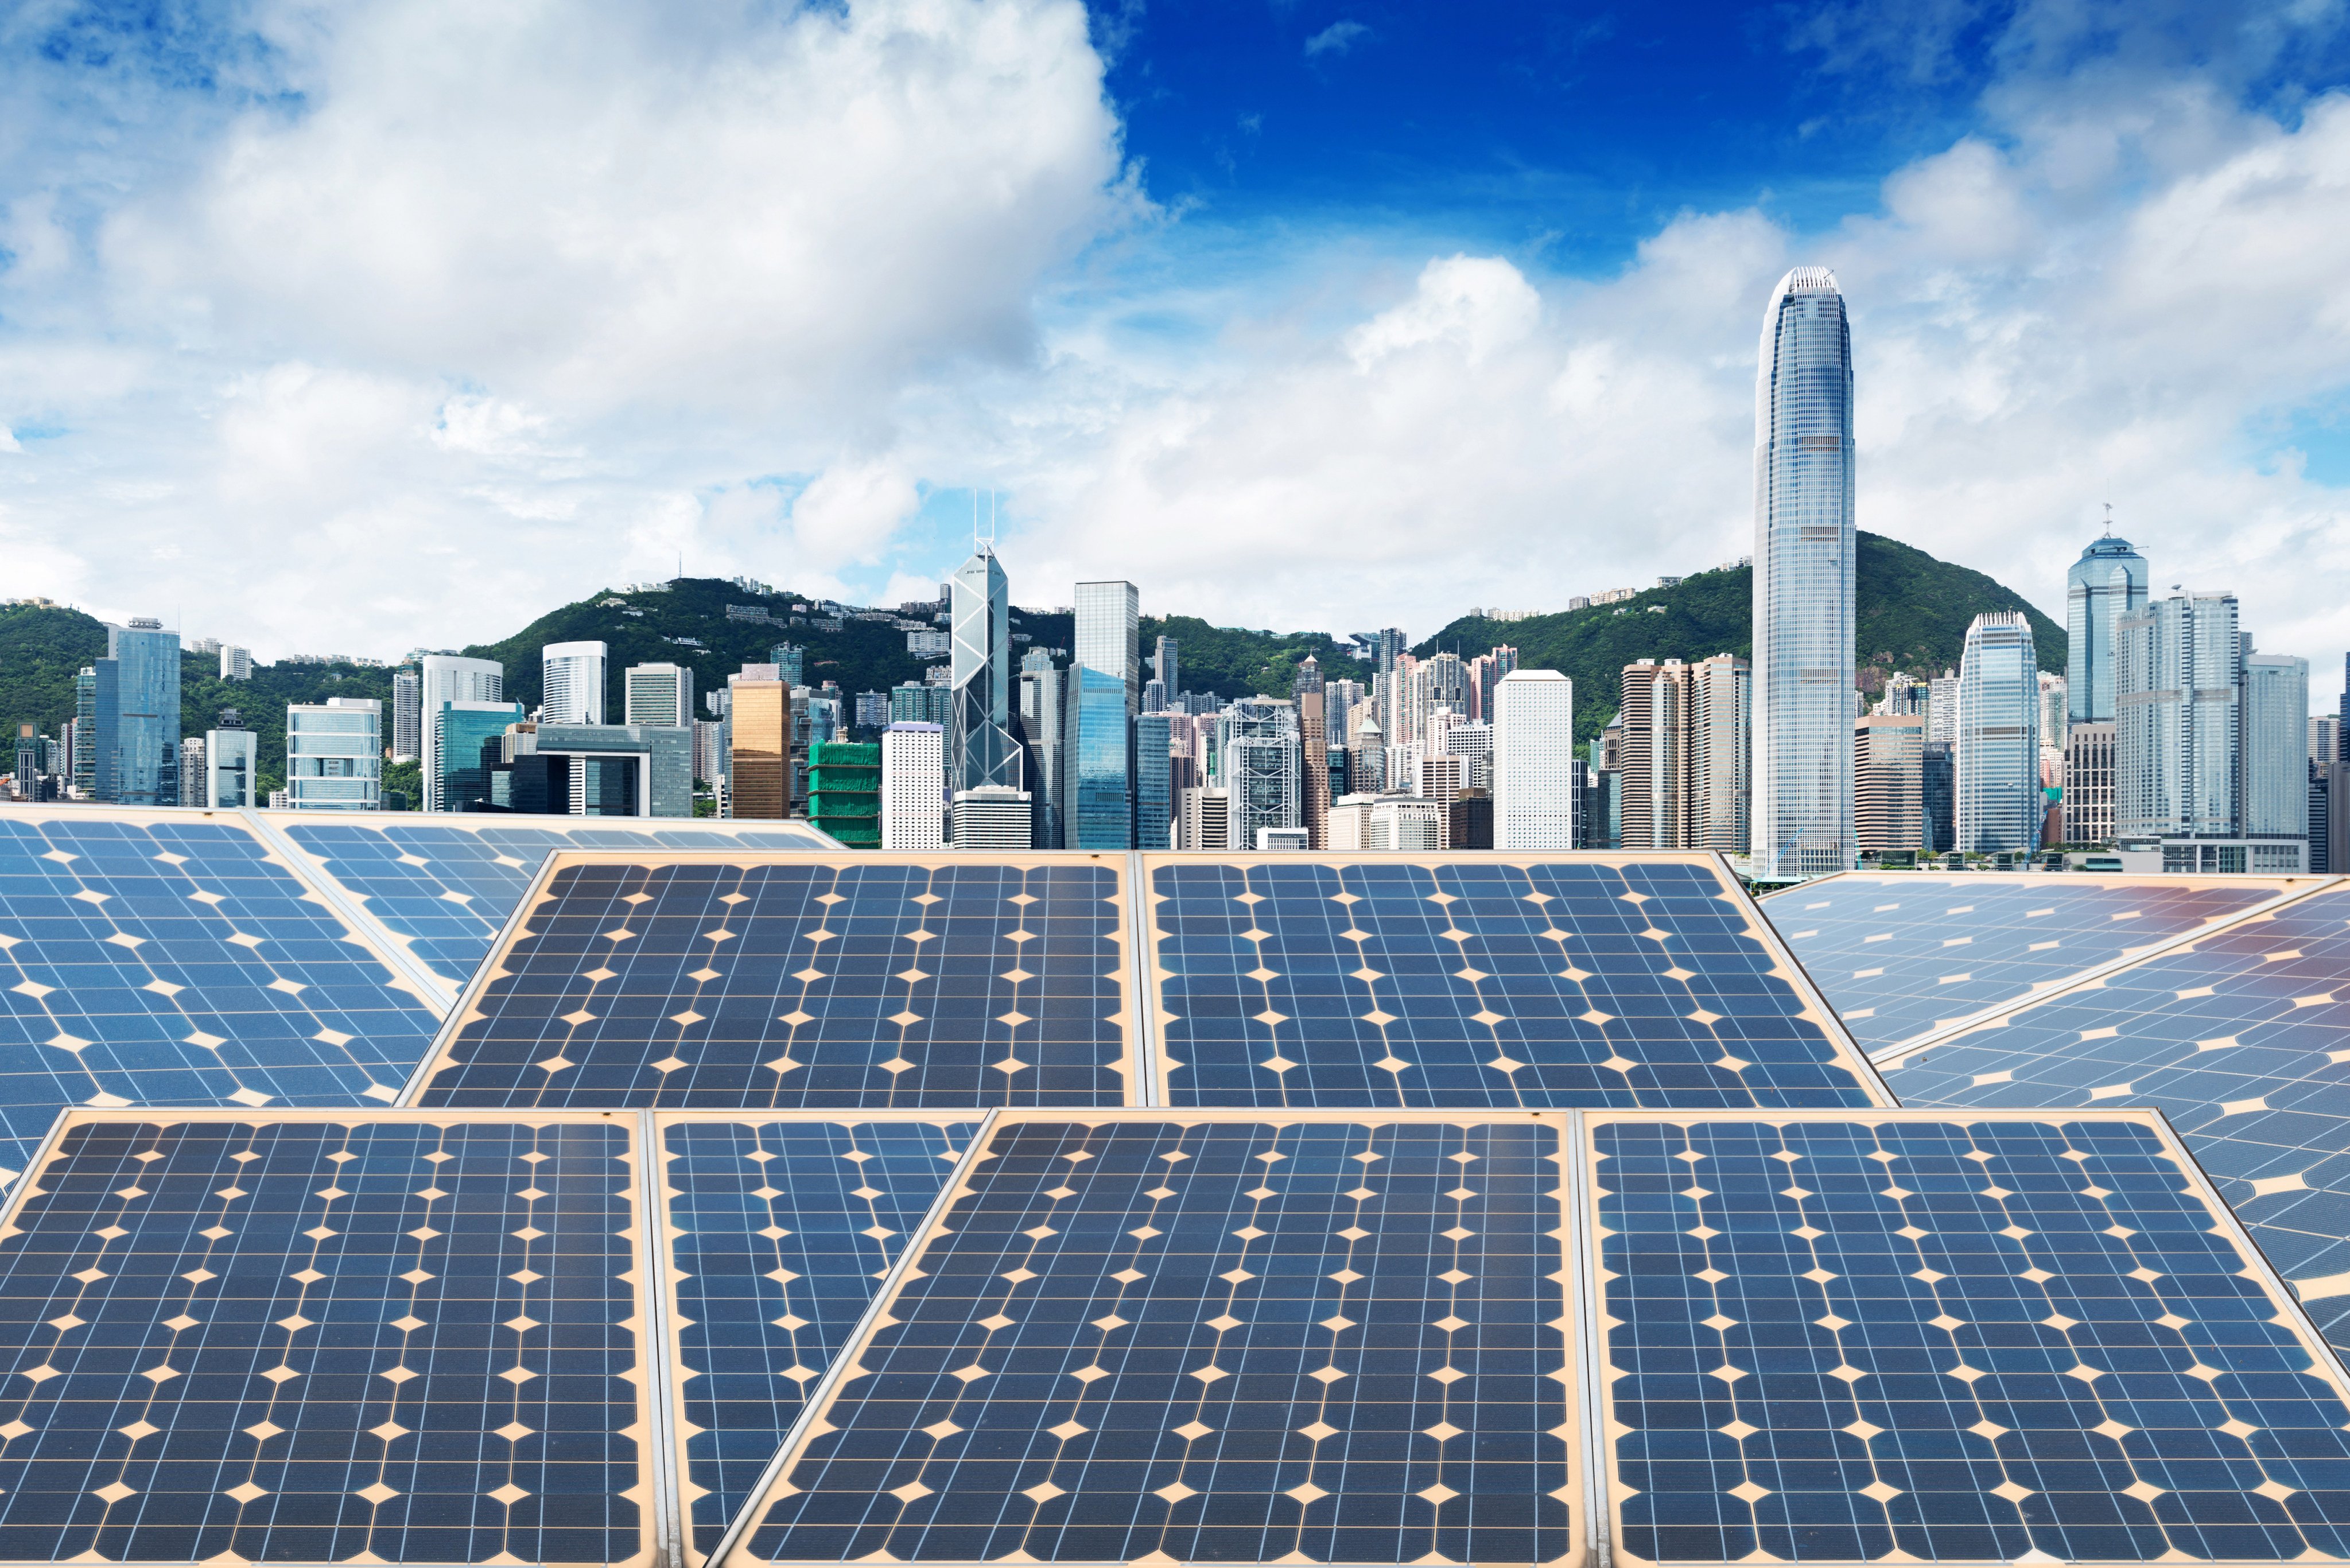 Hong Kong has helped fuel a surge in bond sales tied to green and sustainable projects, spending HK$210 million to subsidise issuance costs. Photo: Shutterstock